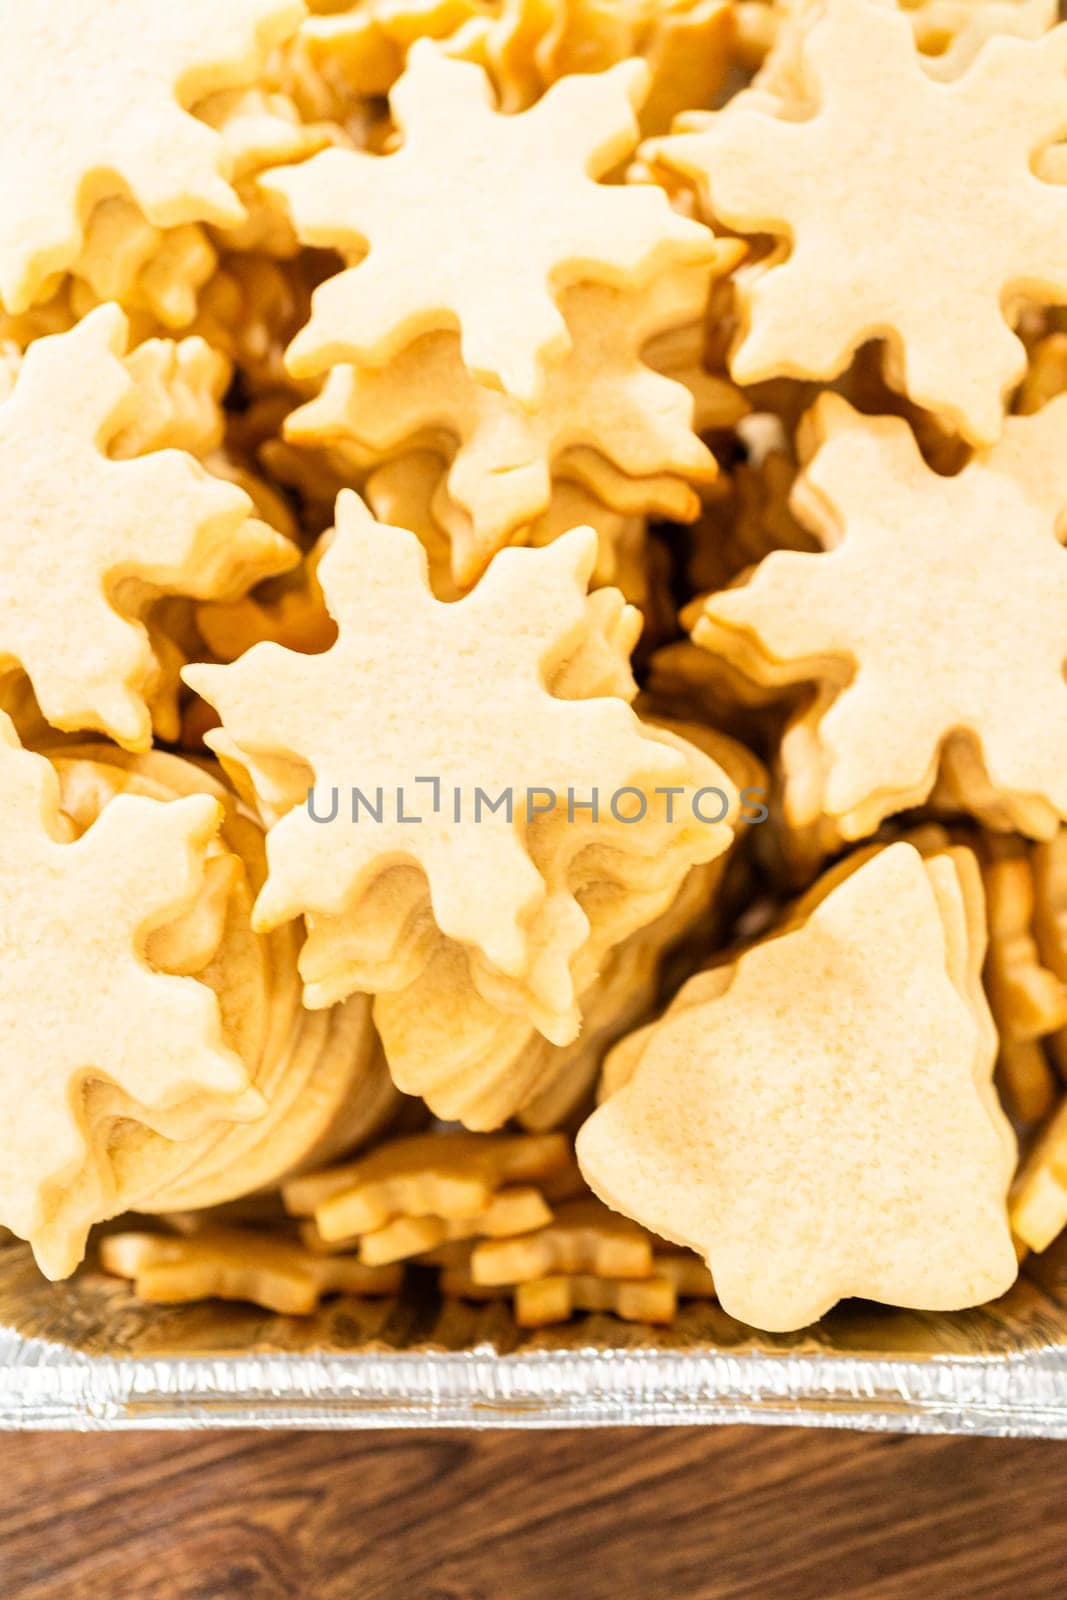 Golden-hued cookies shaped like snowflakes, intricately stacked.